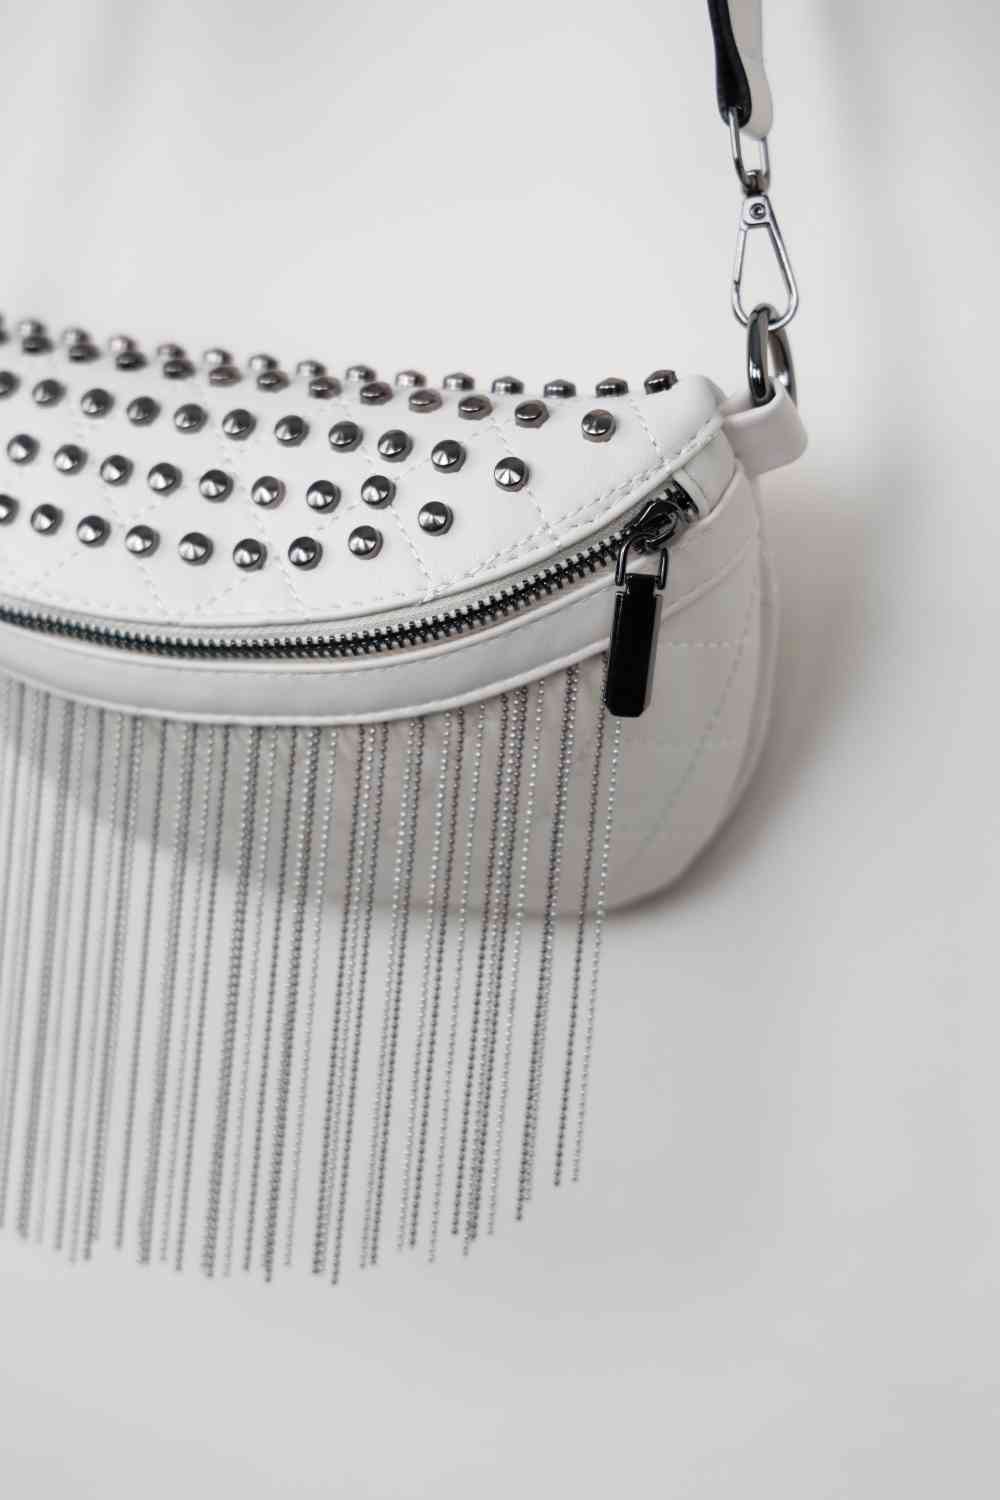 Adored Leather Studded Sling Bag with Fringes